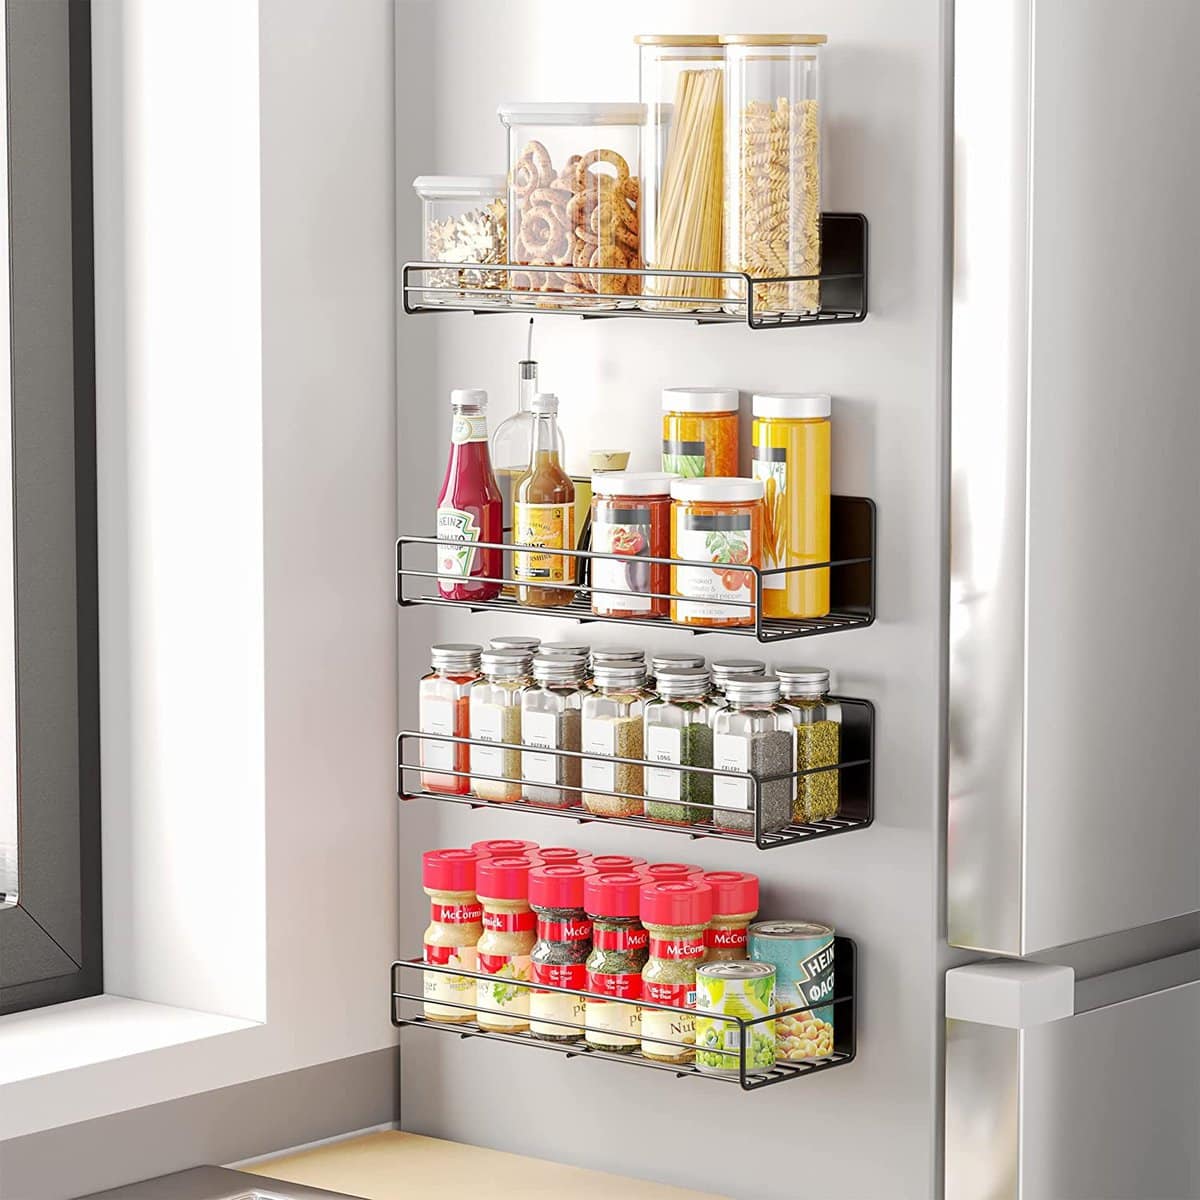 Kitchen organization ideas - Four magnetic metal racks on the side of a fridge holding several spices.